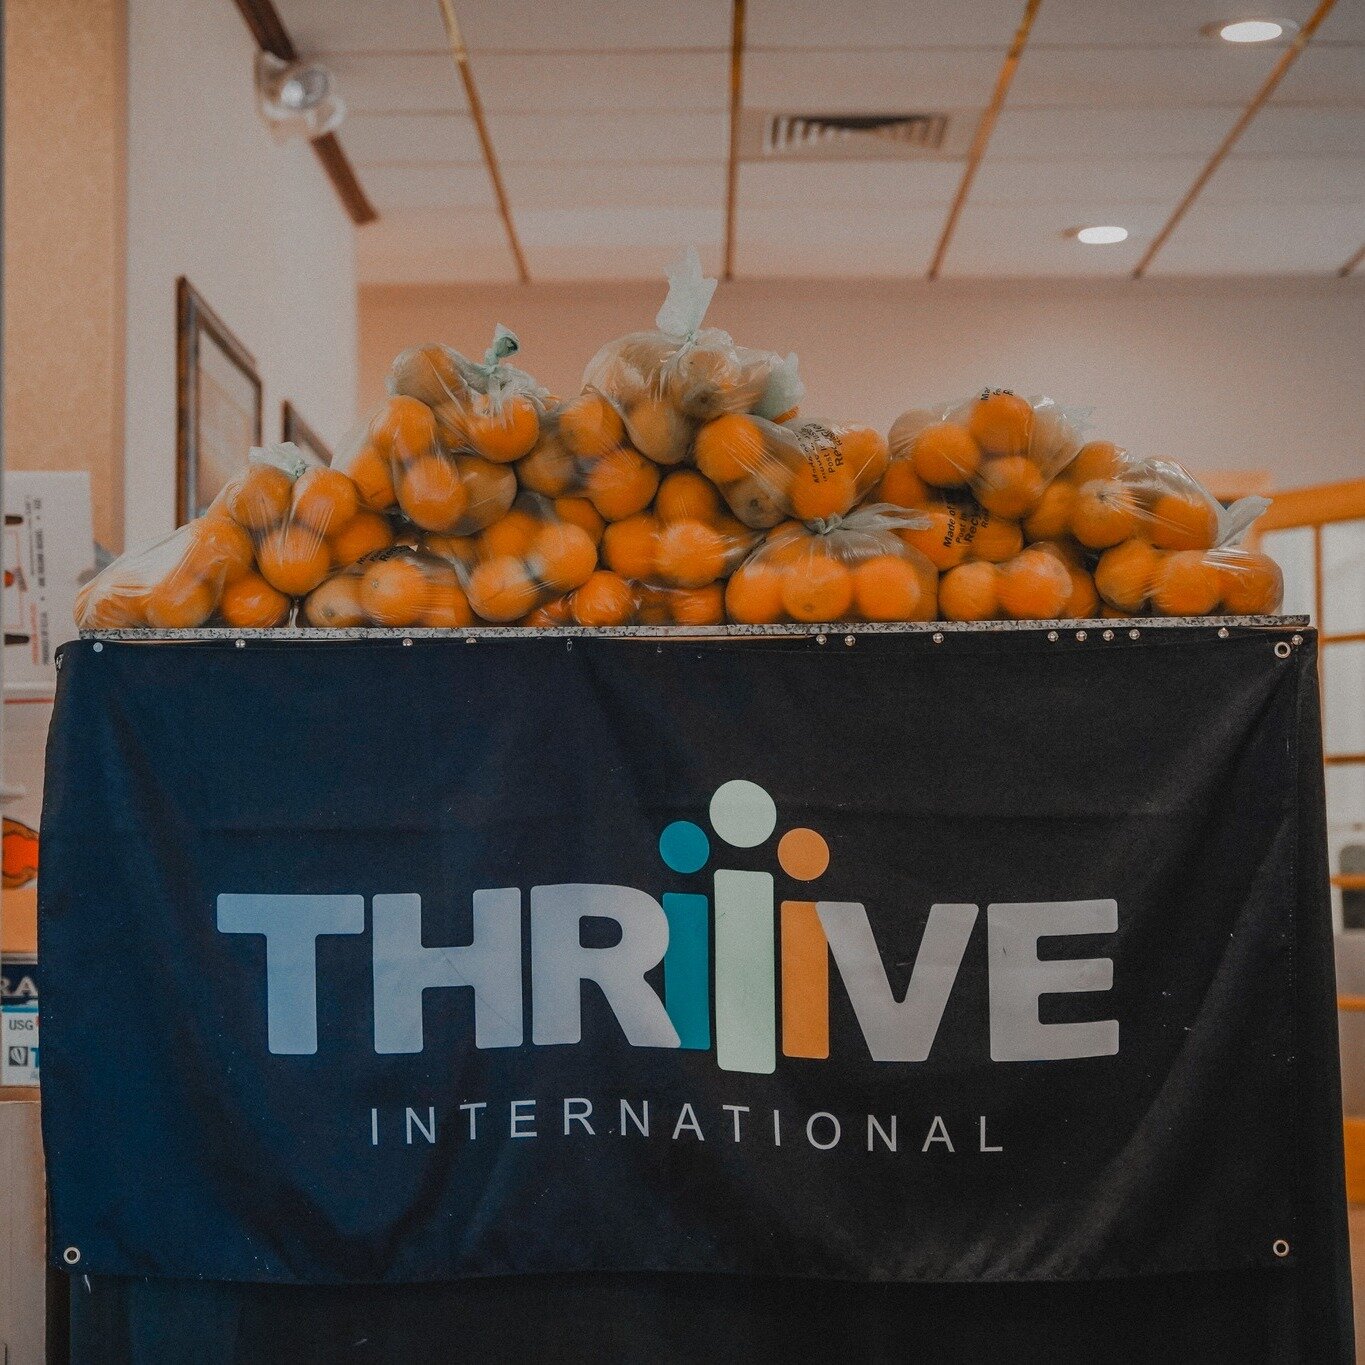 Gonzaga Campus Kitchen and Sodexo Dining have joined us to make this summer extra special for Thrive youth, residents, and program participants. 🌱☀️ Every Tuesday, these amazing teams have delivered fresh snacks and goodies to the Thrive Center. Tha